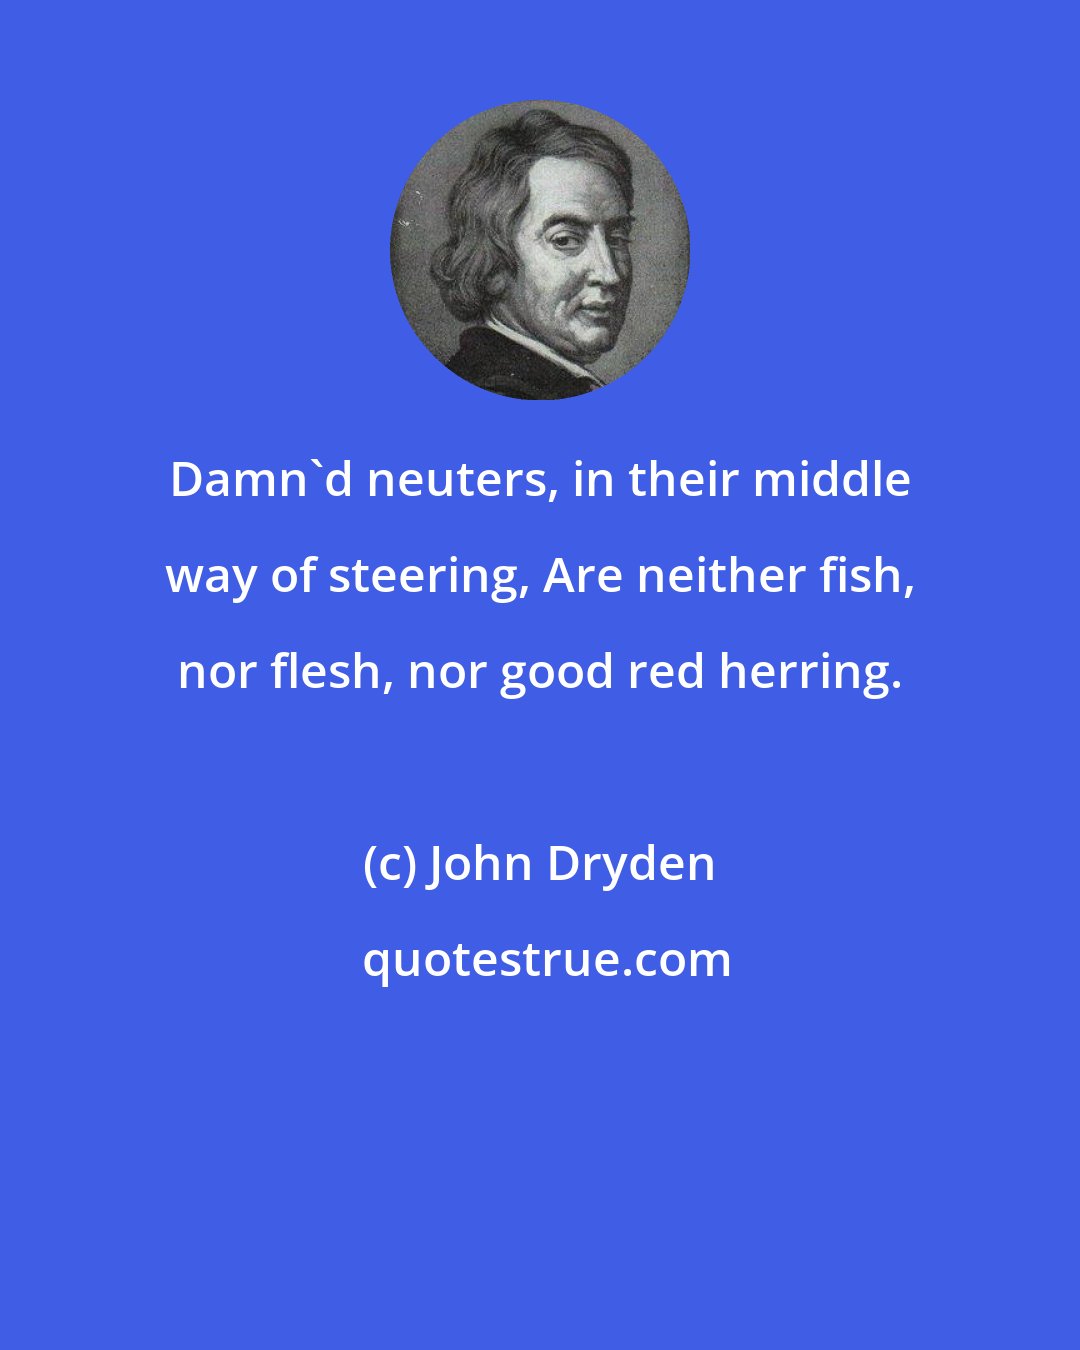 John Dryden: Damn'd neuters, in their middle way of steering, Are neither fish, nor flesh, nor good red herring.